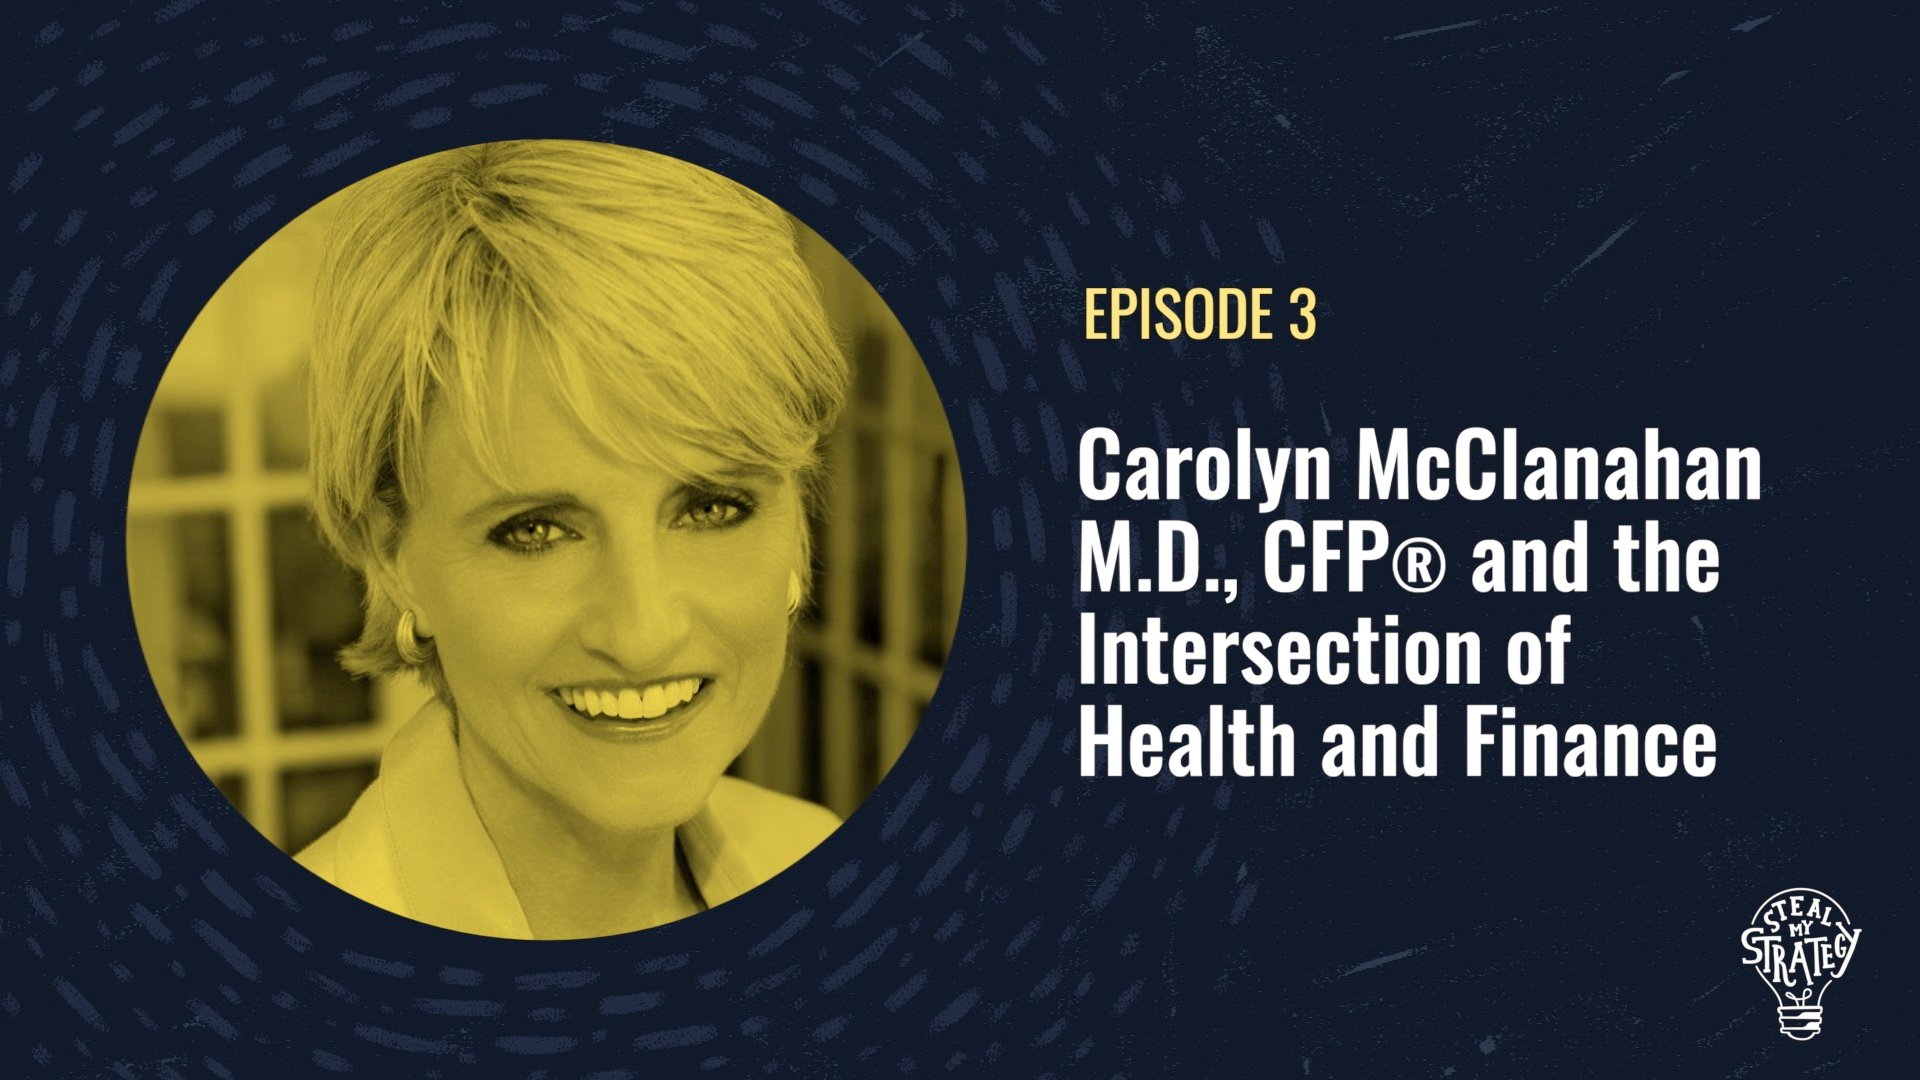 Carolyn McClanahan M.D., CFP® and the Intersection of Health and Finance